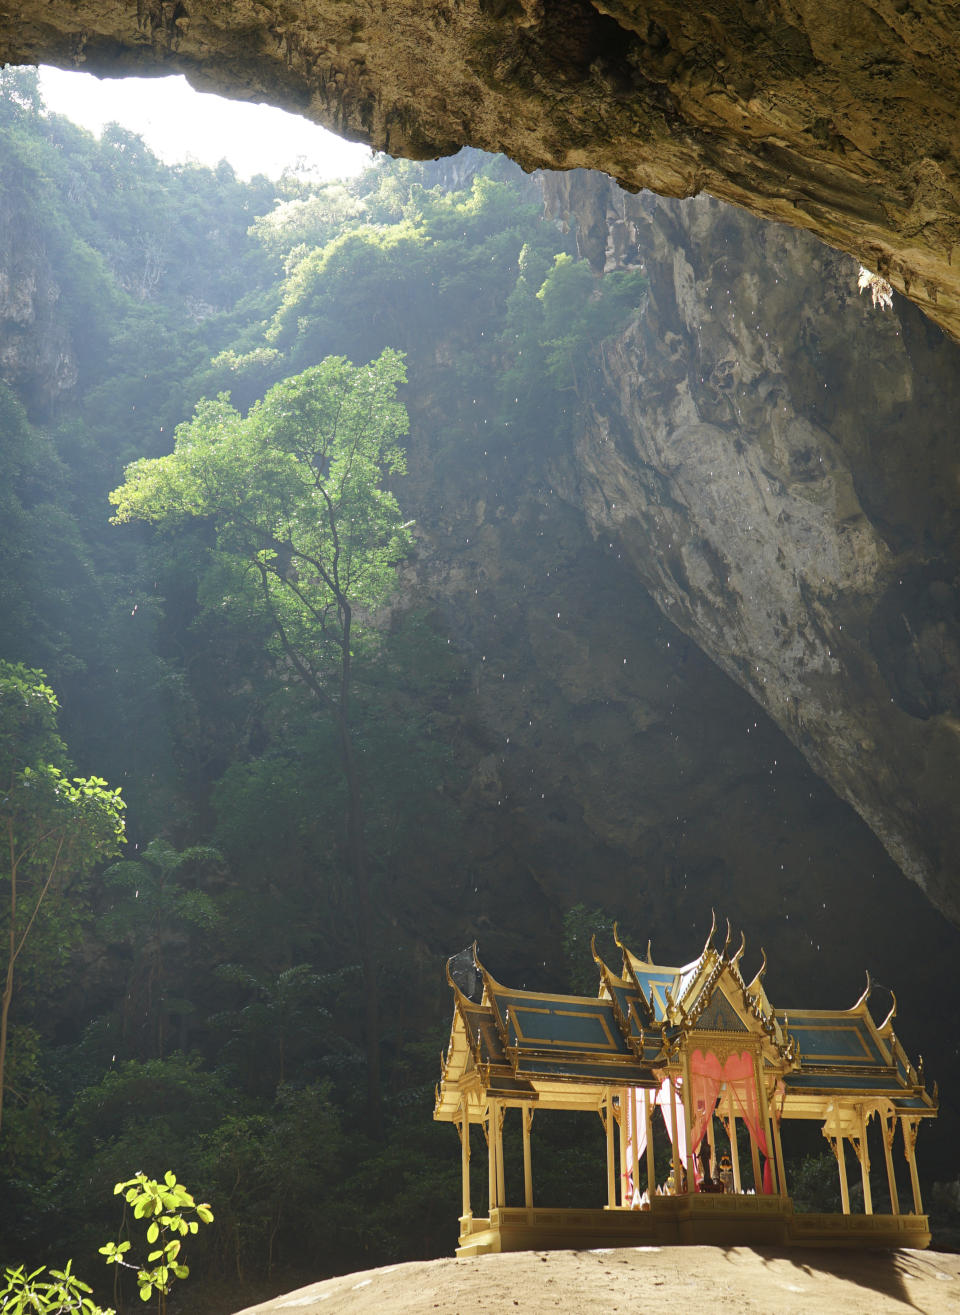 This Nov. 17, 2018 photo shows the royal pavilion drenched in sunlight inside the Phraya Nakhon Cave located in Thailand's Khao Sam Roi Yot National Park. Its lush hiking trails, wetlands and mangrove forests make Khao Sam Roi Yot National Park a weekend adventure worthy of topping your Thailand to-do list. (AP Photo/Nicole Evatt)